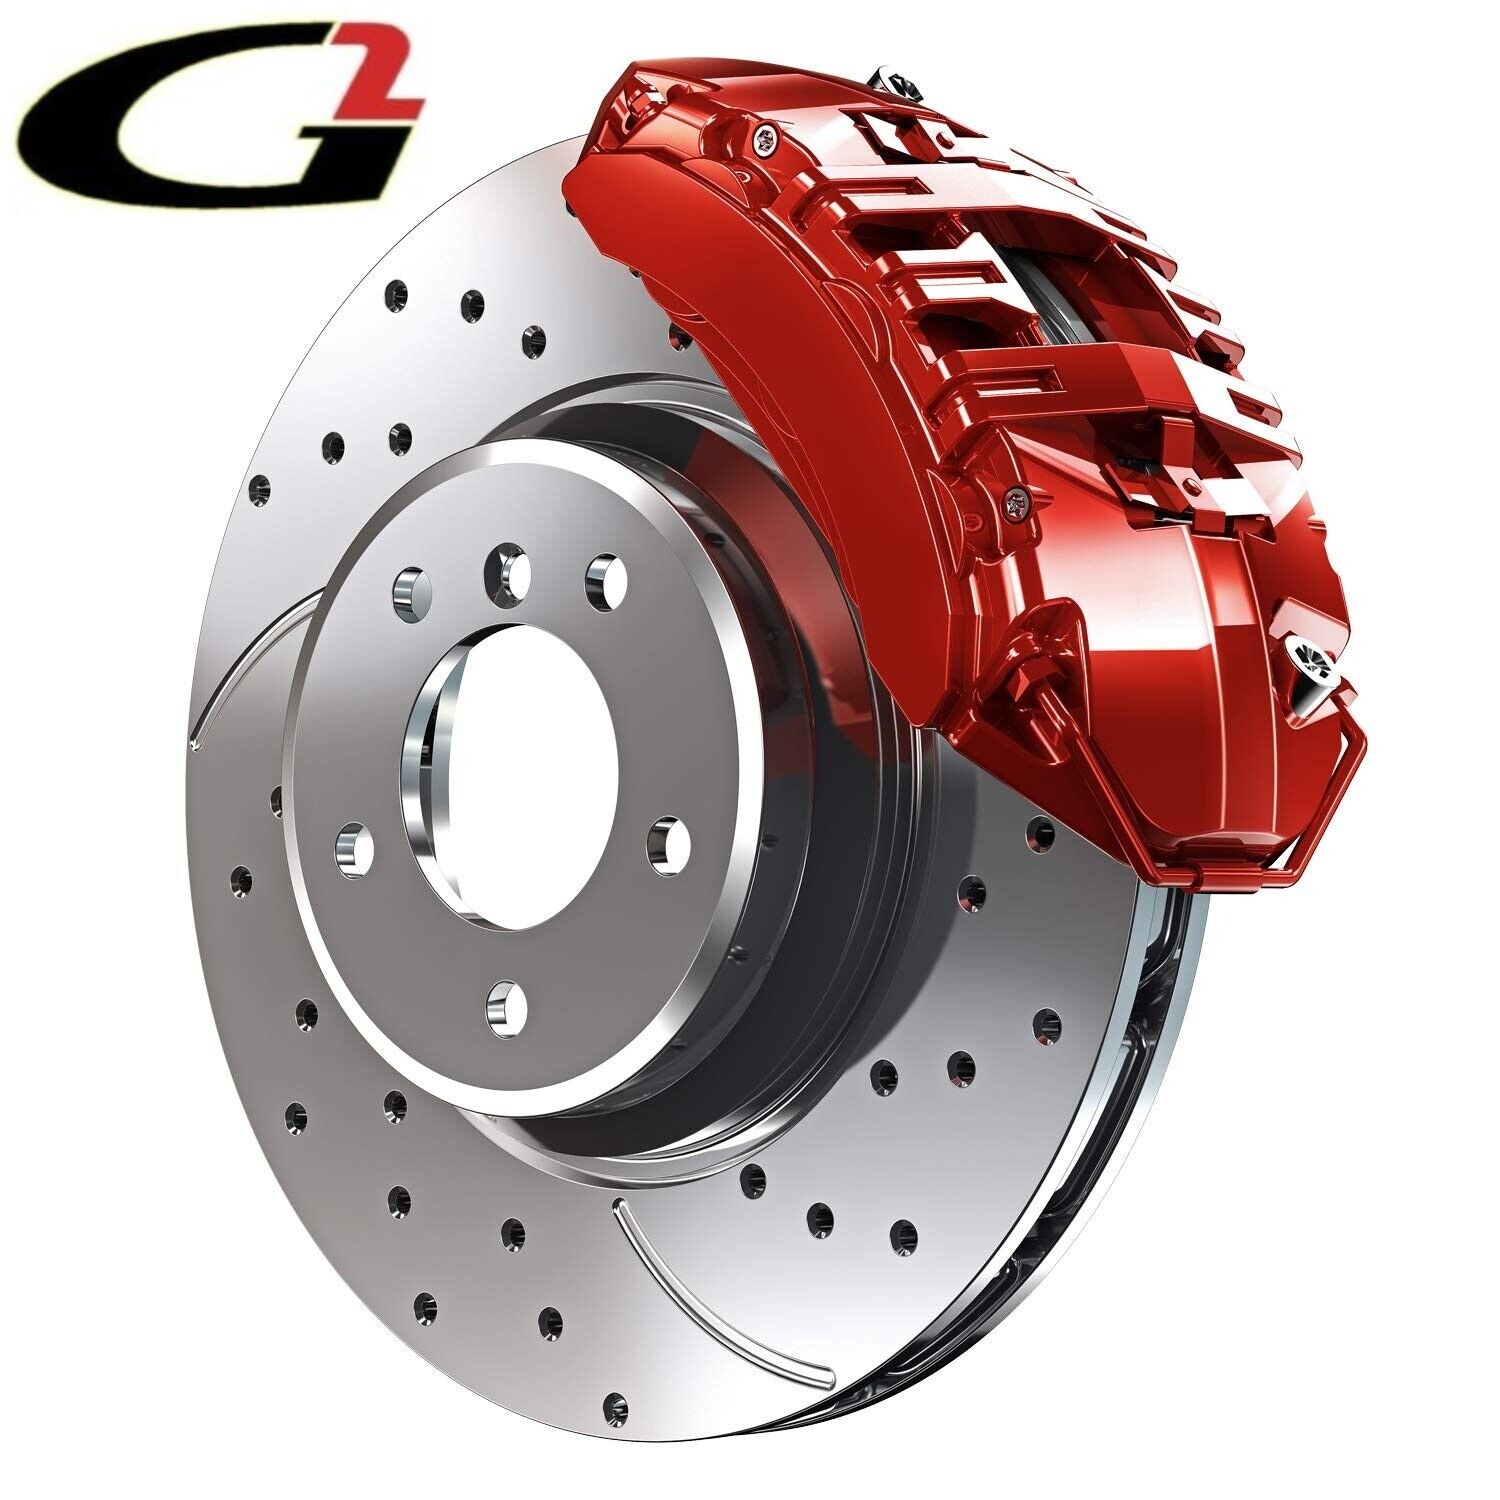 RED G2 BRAKE CALIPER PAINT EPOXY STYLE KIT HIGH HEAT MADE IN USA 